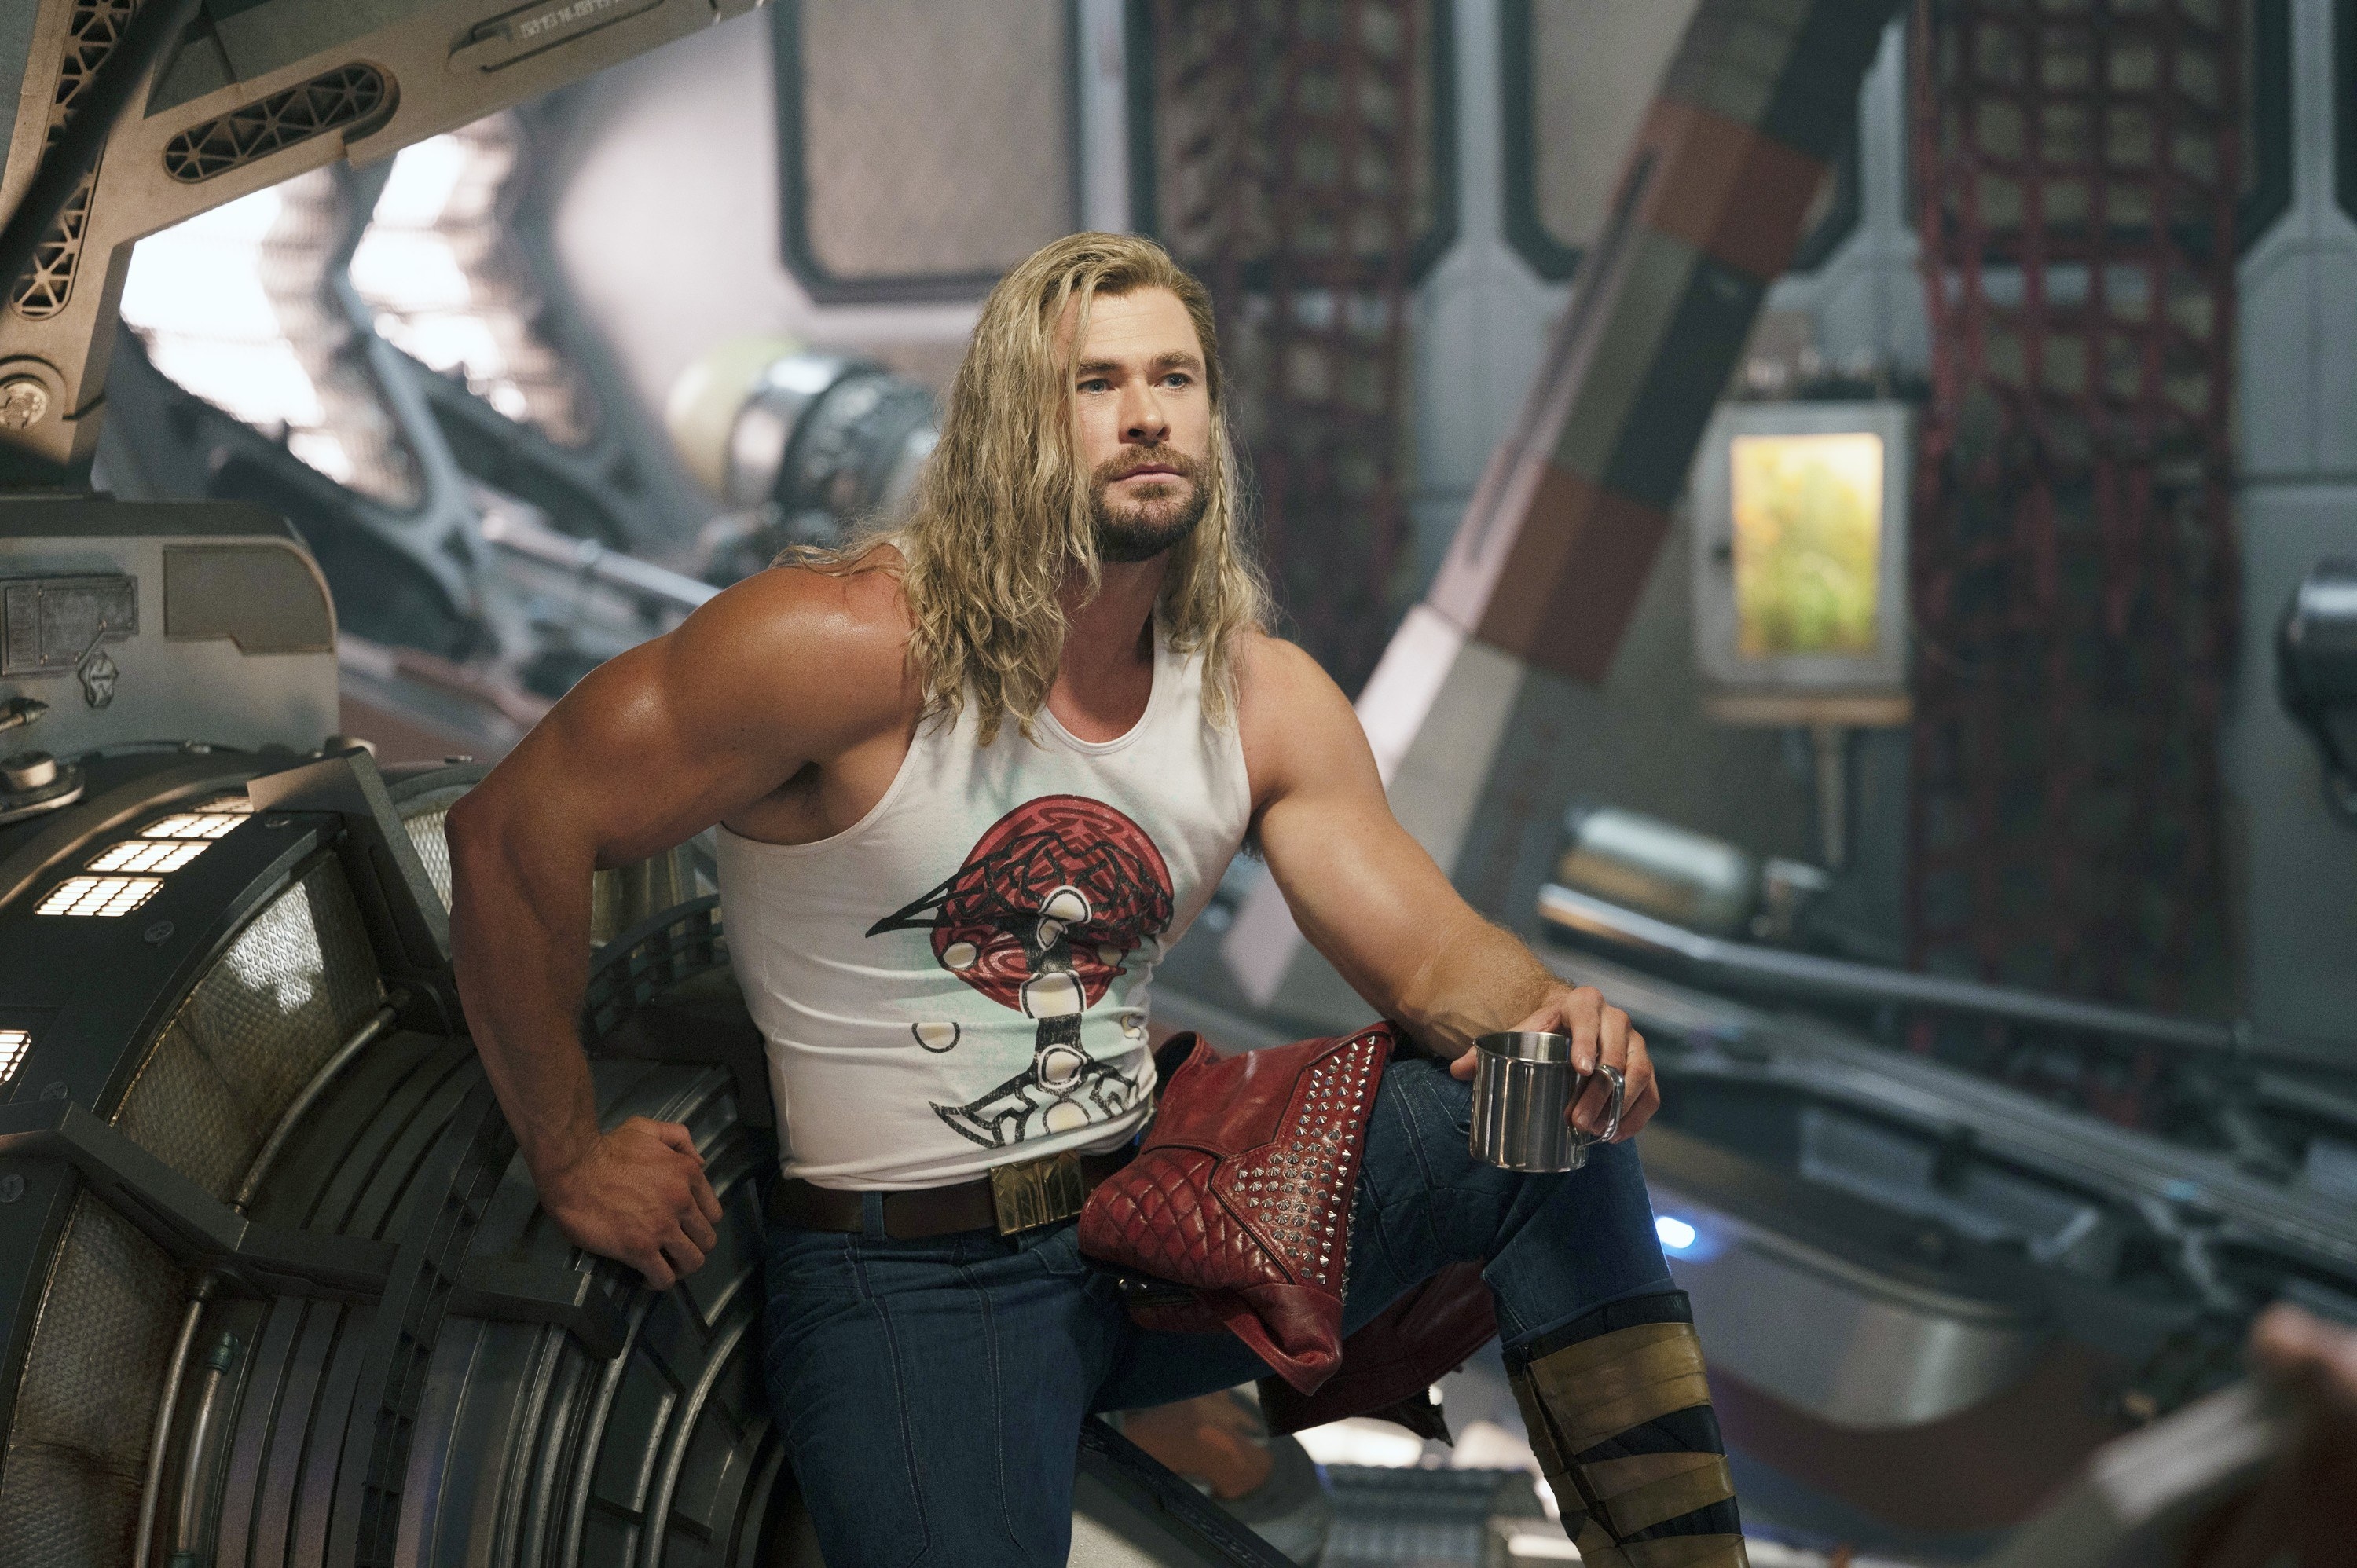 Thor in a muscle shirt and jeans